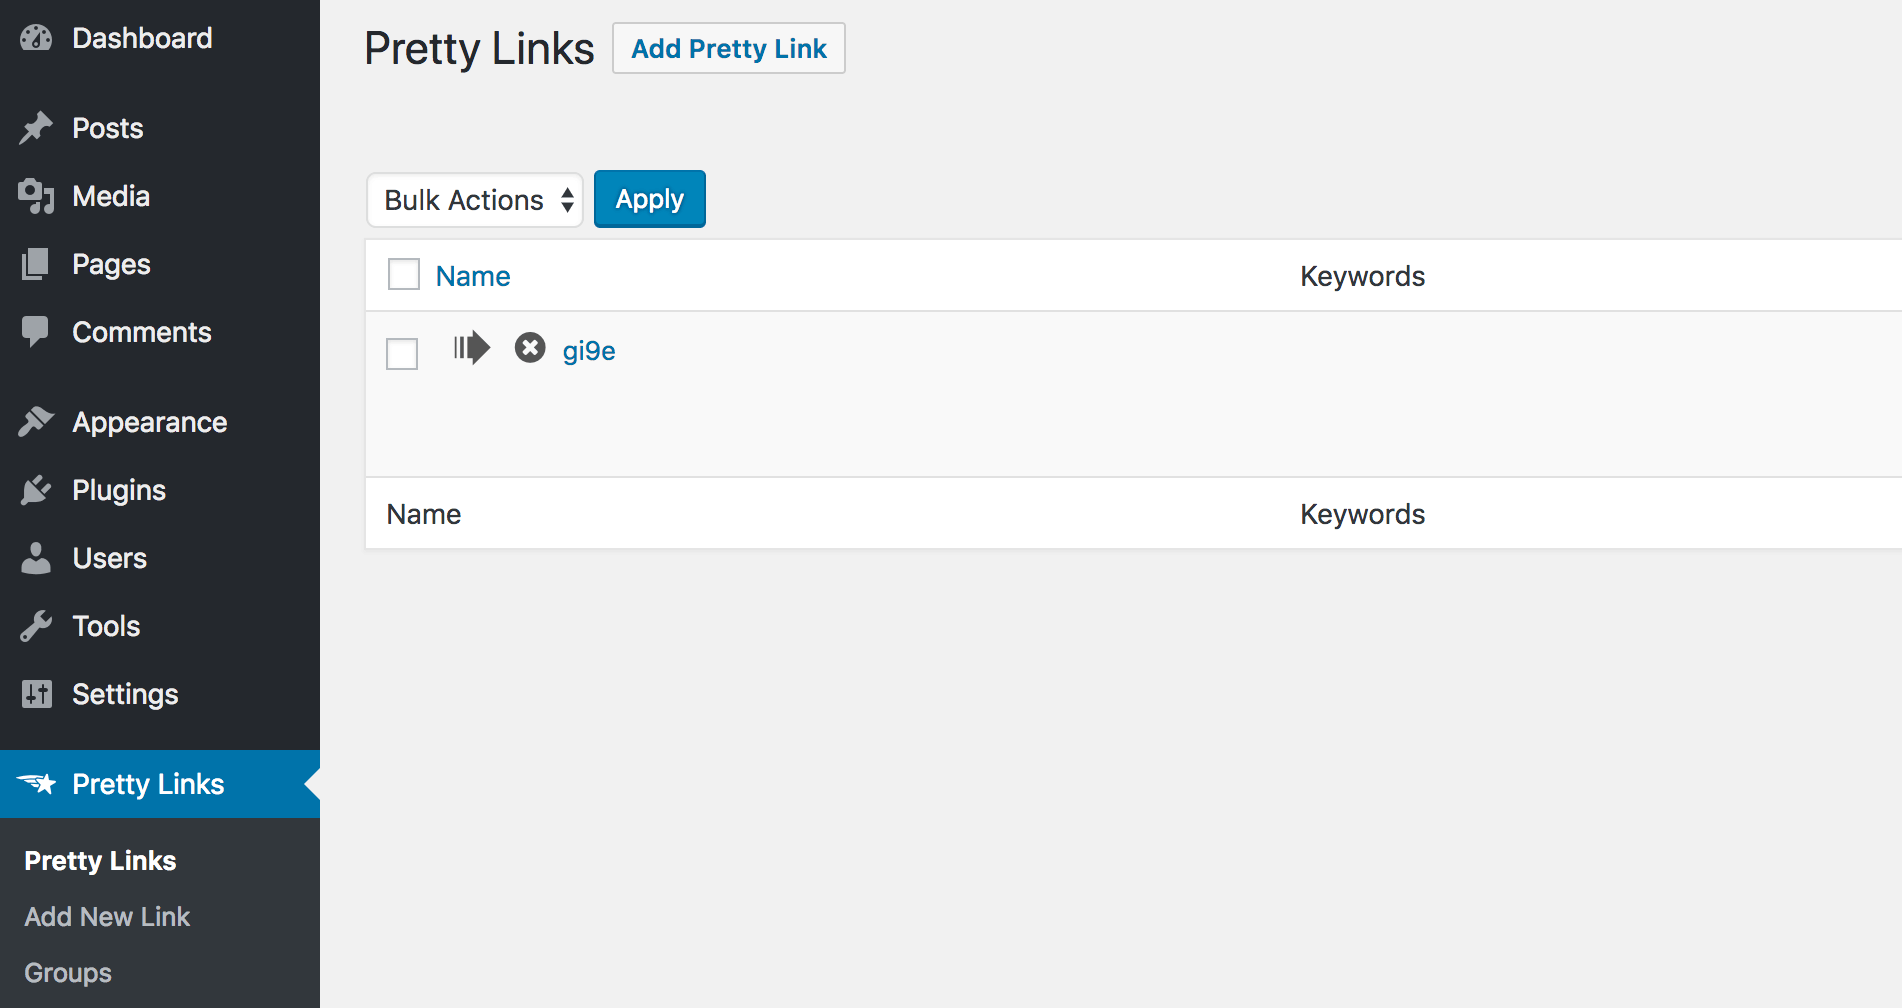 The Pretty Links page in the WordPress admin dashboard.